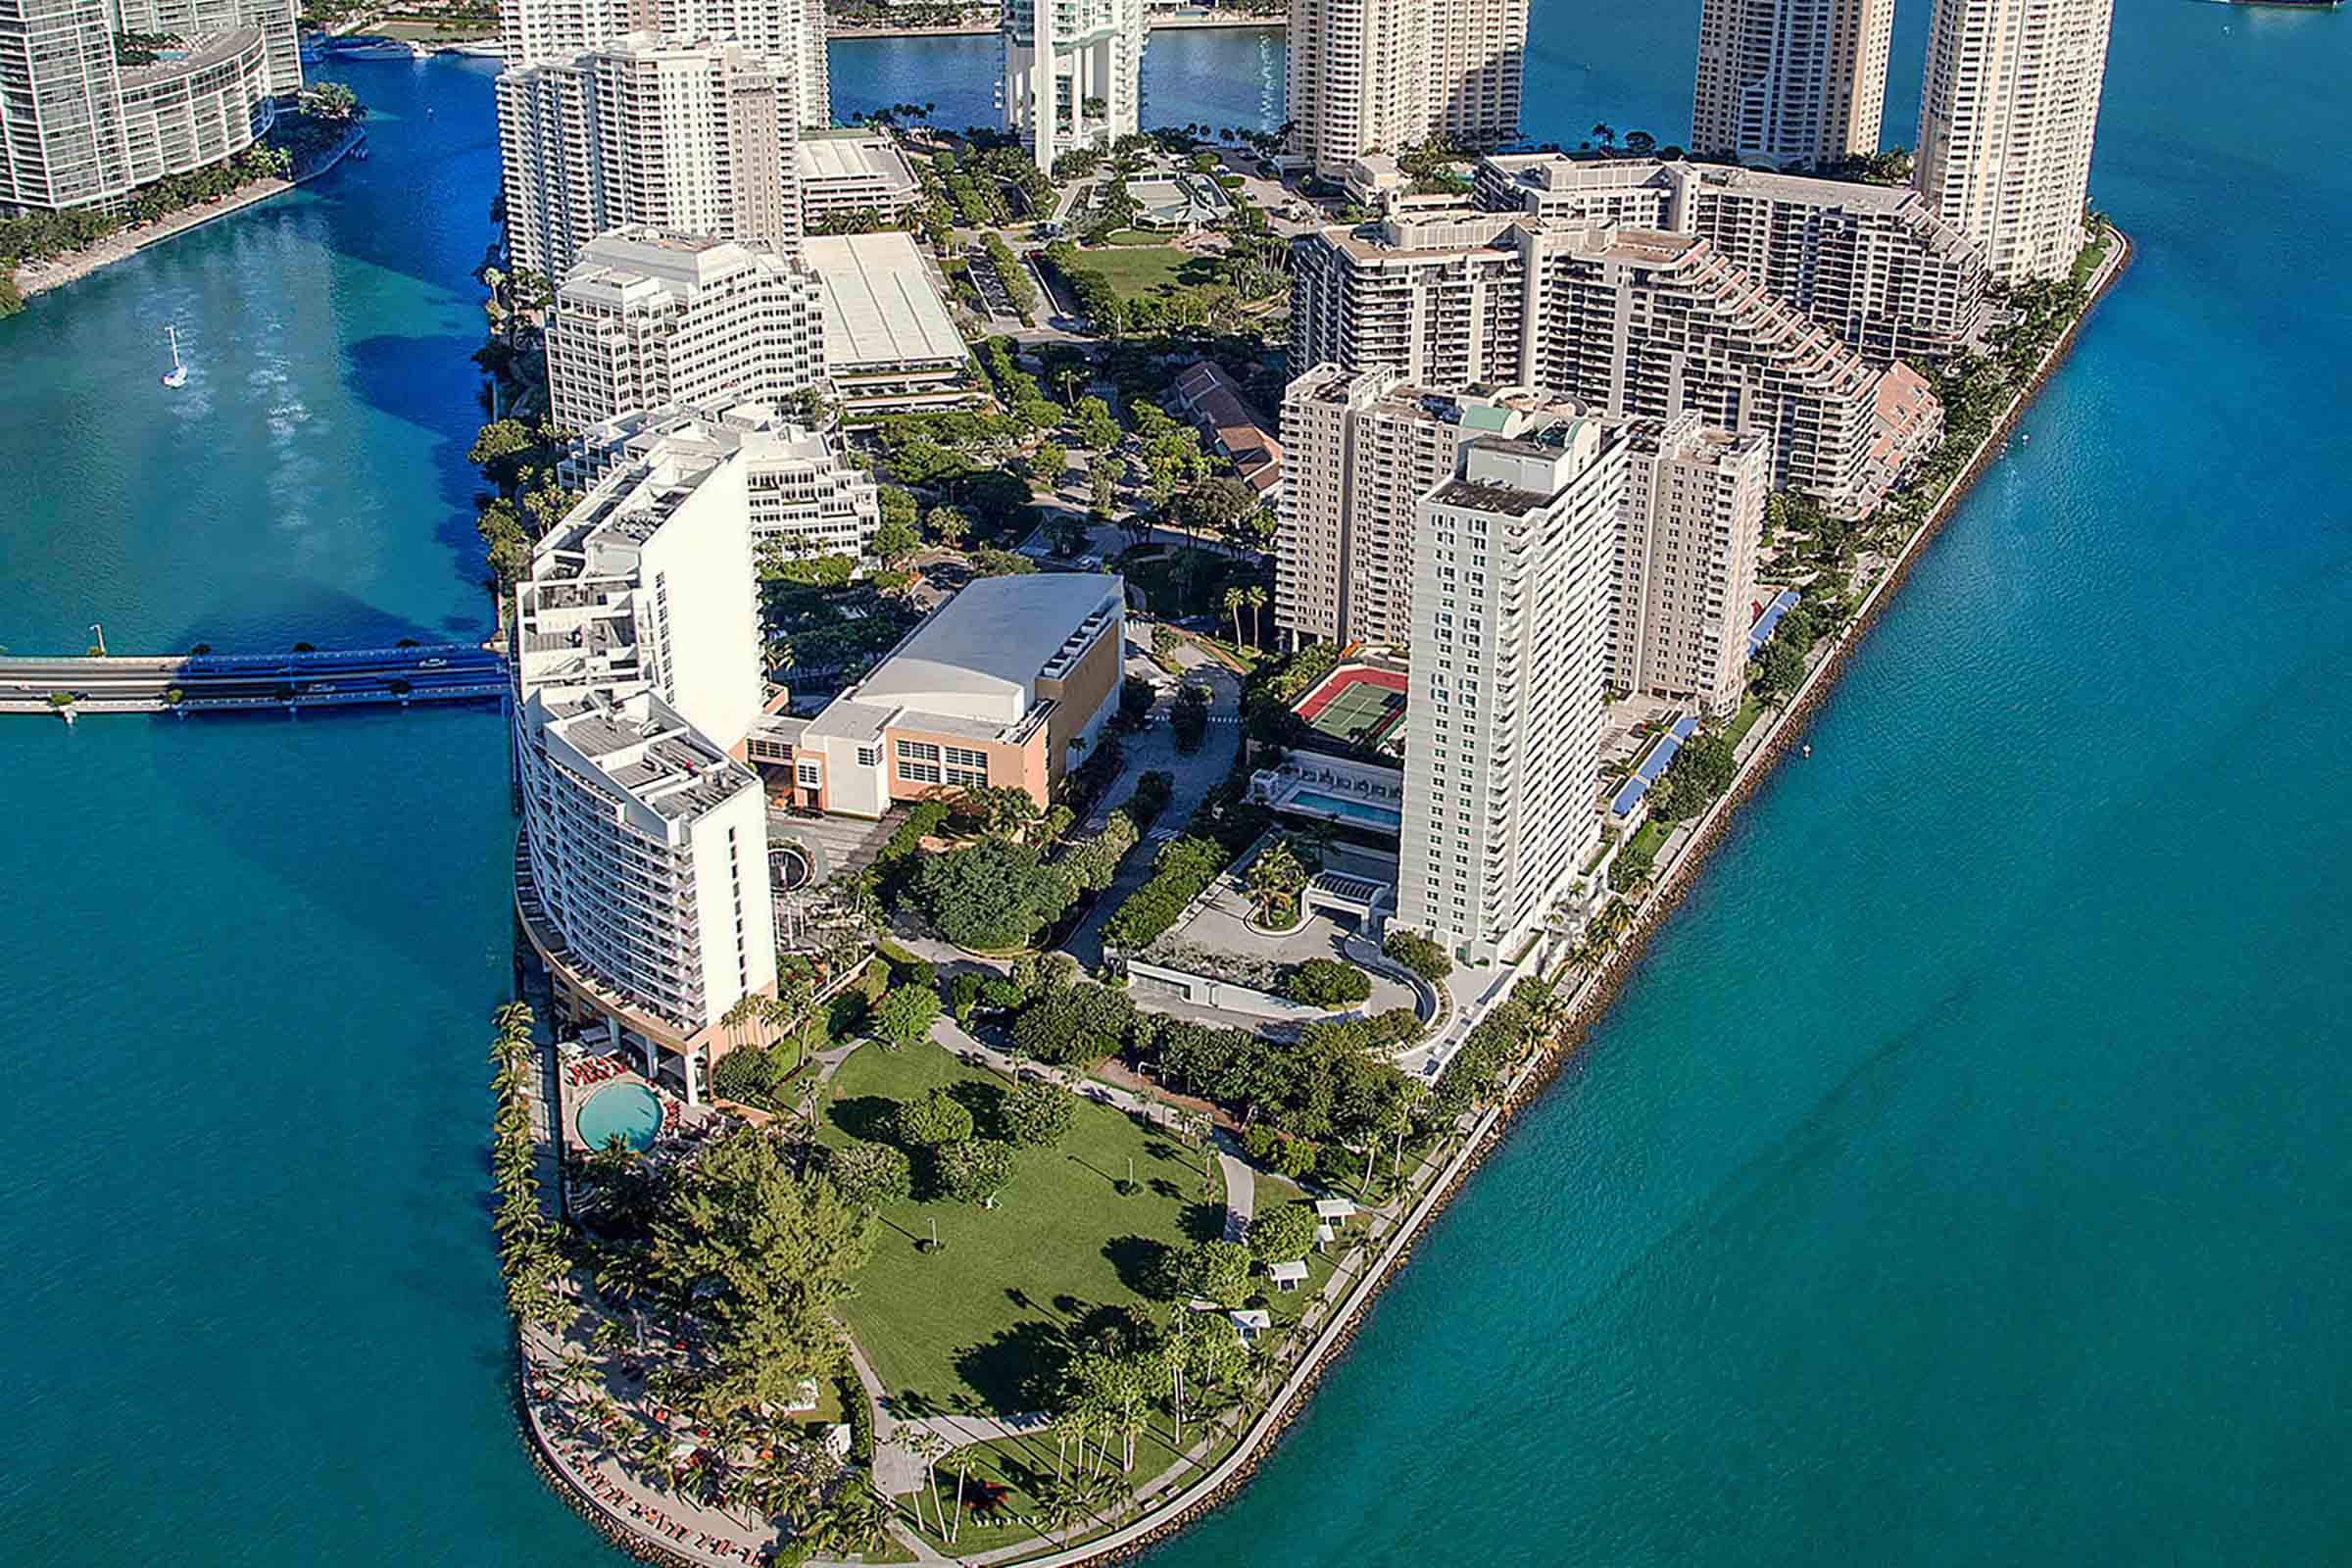 Swire Moves To Build Supertall Project On Last Brickell Key Development Site